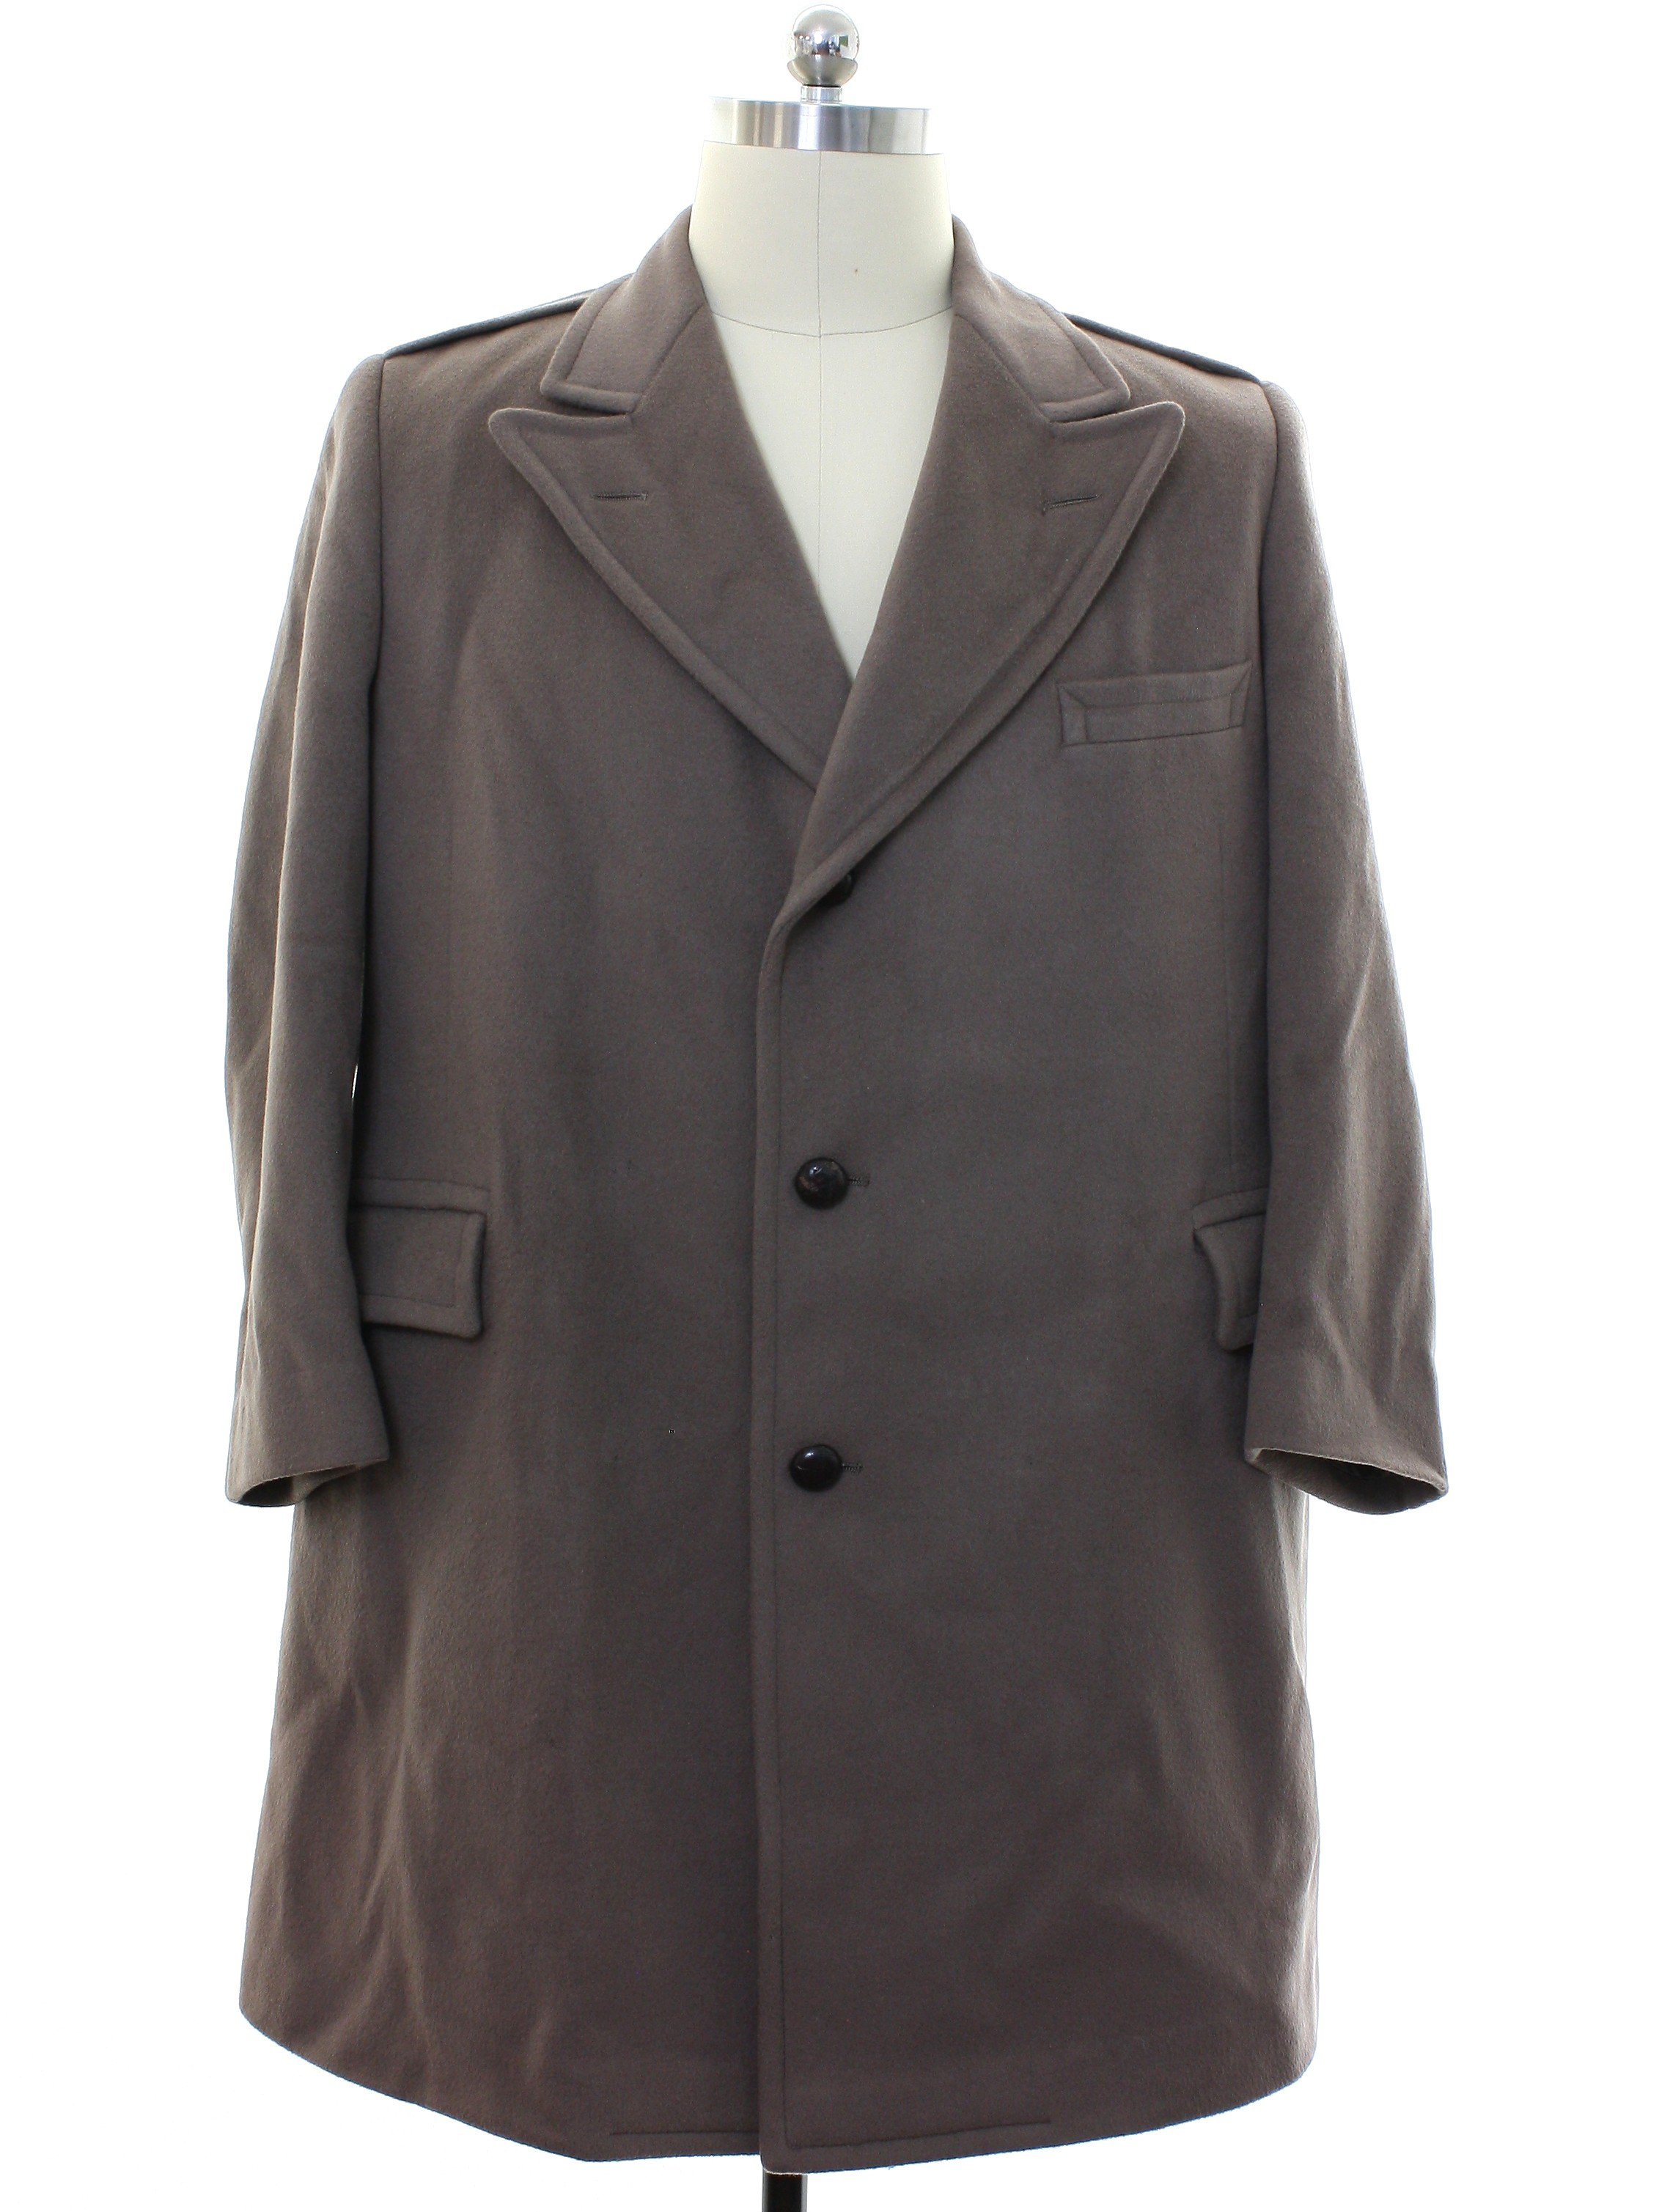 Retro 70's Jacket: Early 70s -Marshall Field and Co.- Mens taupe ...